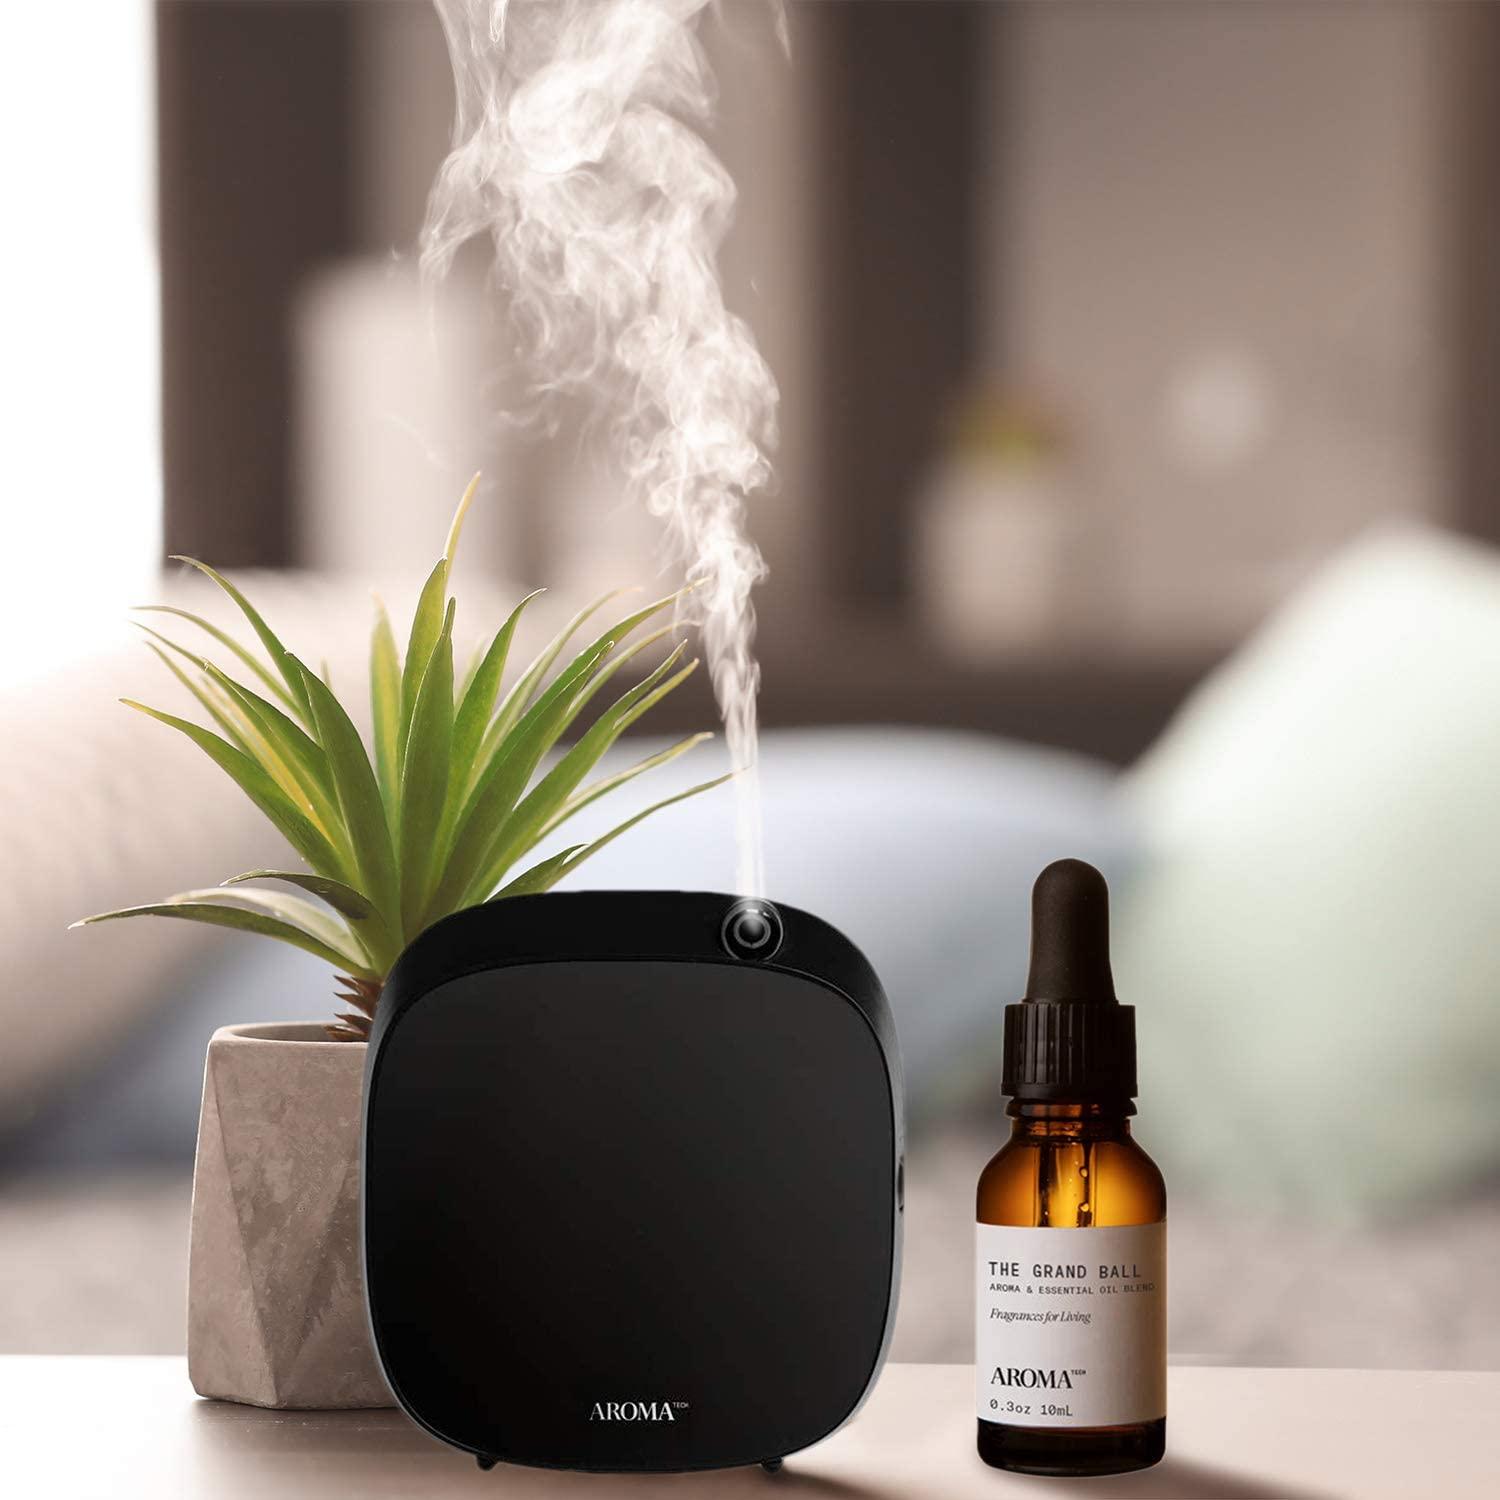 AromaTech Santal & The Hotel Set | Gift Set of Aroma Diffuser Essential  Oils Blend of Santal Cardamom, Papyrus, Musk | The Hotel Peach, Red Rose,  Pine